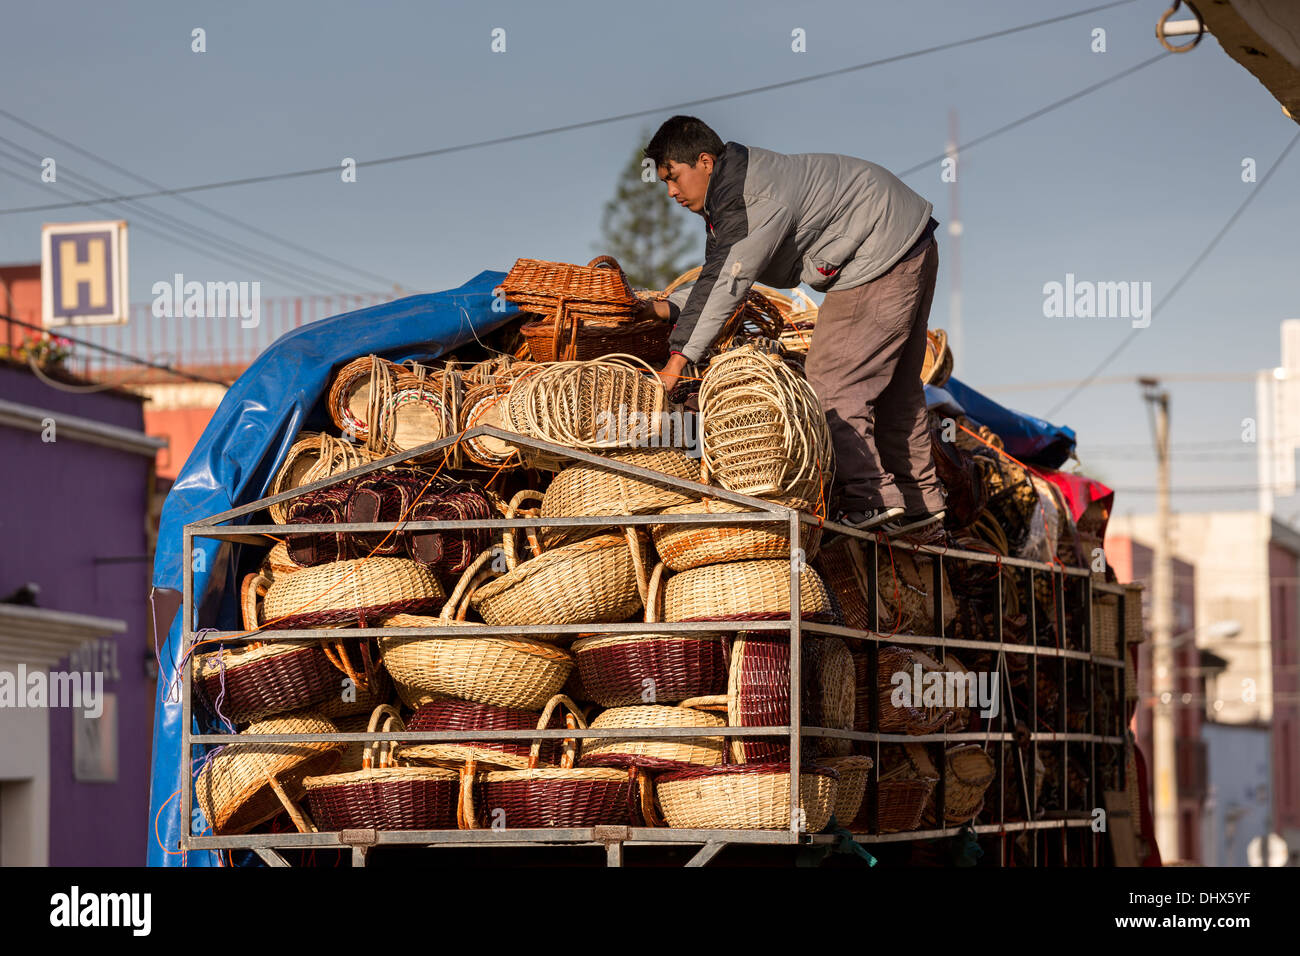 Basket makers deliver their wares at the Benito Juarez Market in Oaxaca, Mexico. Stock Photo